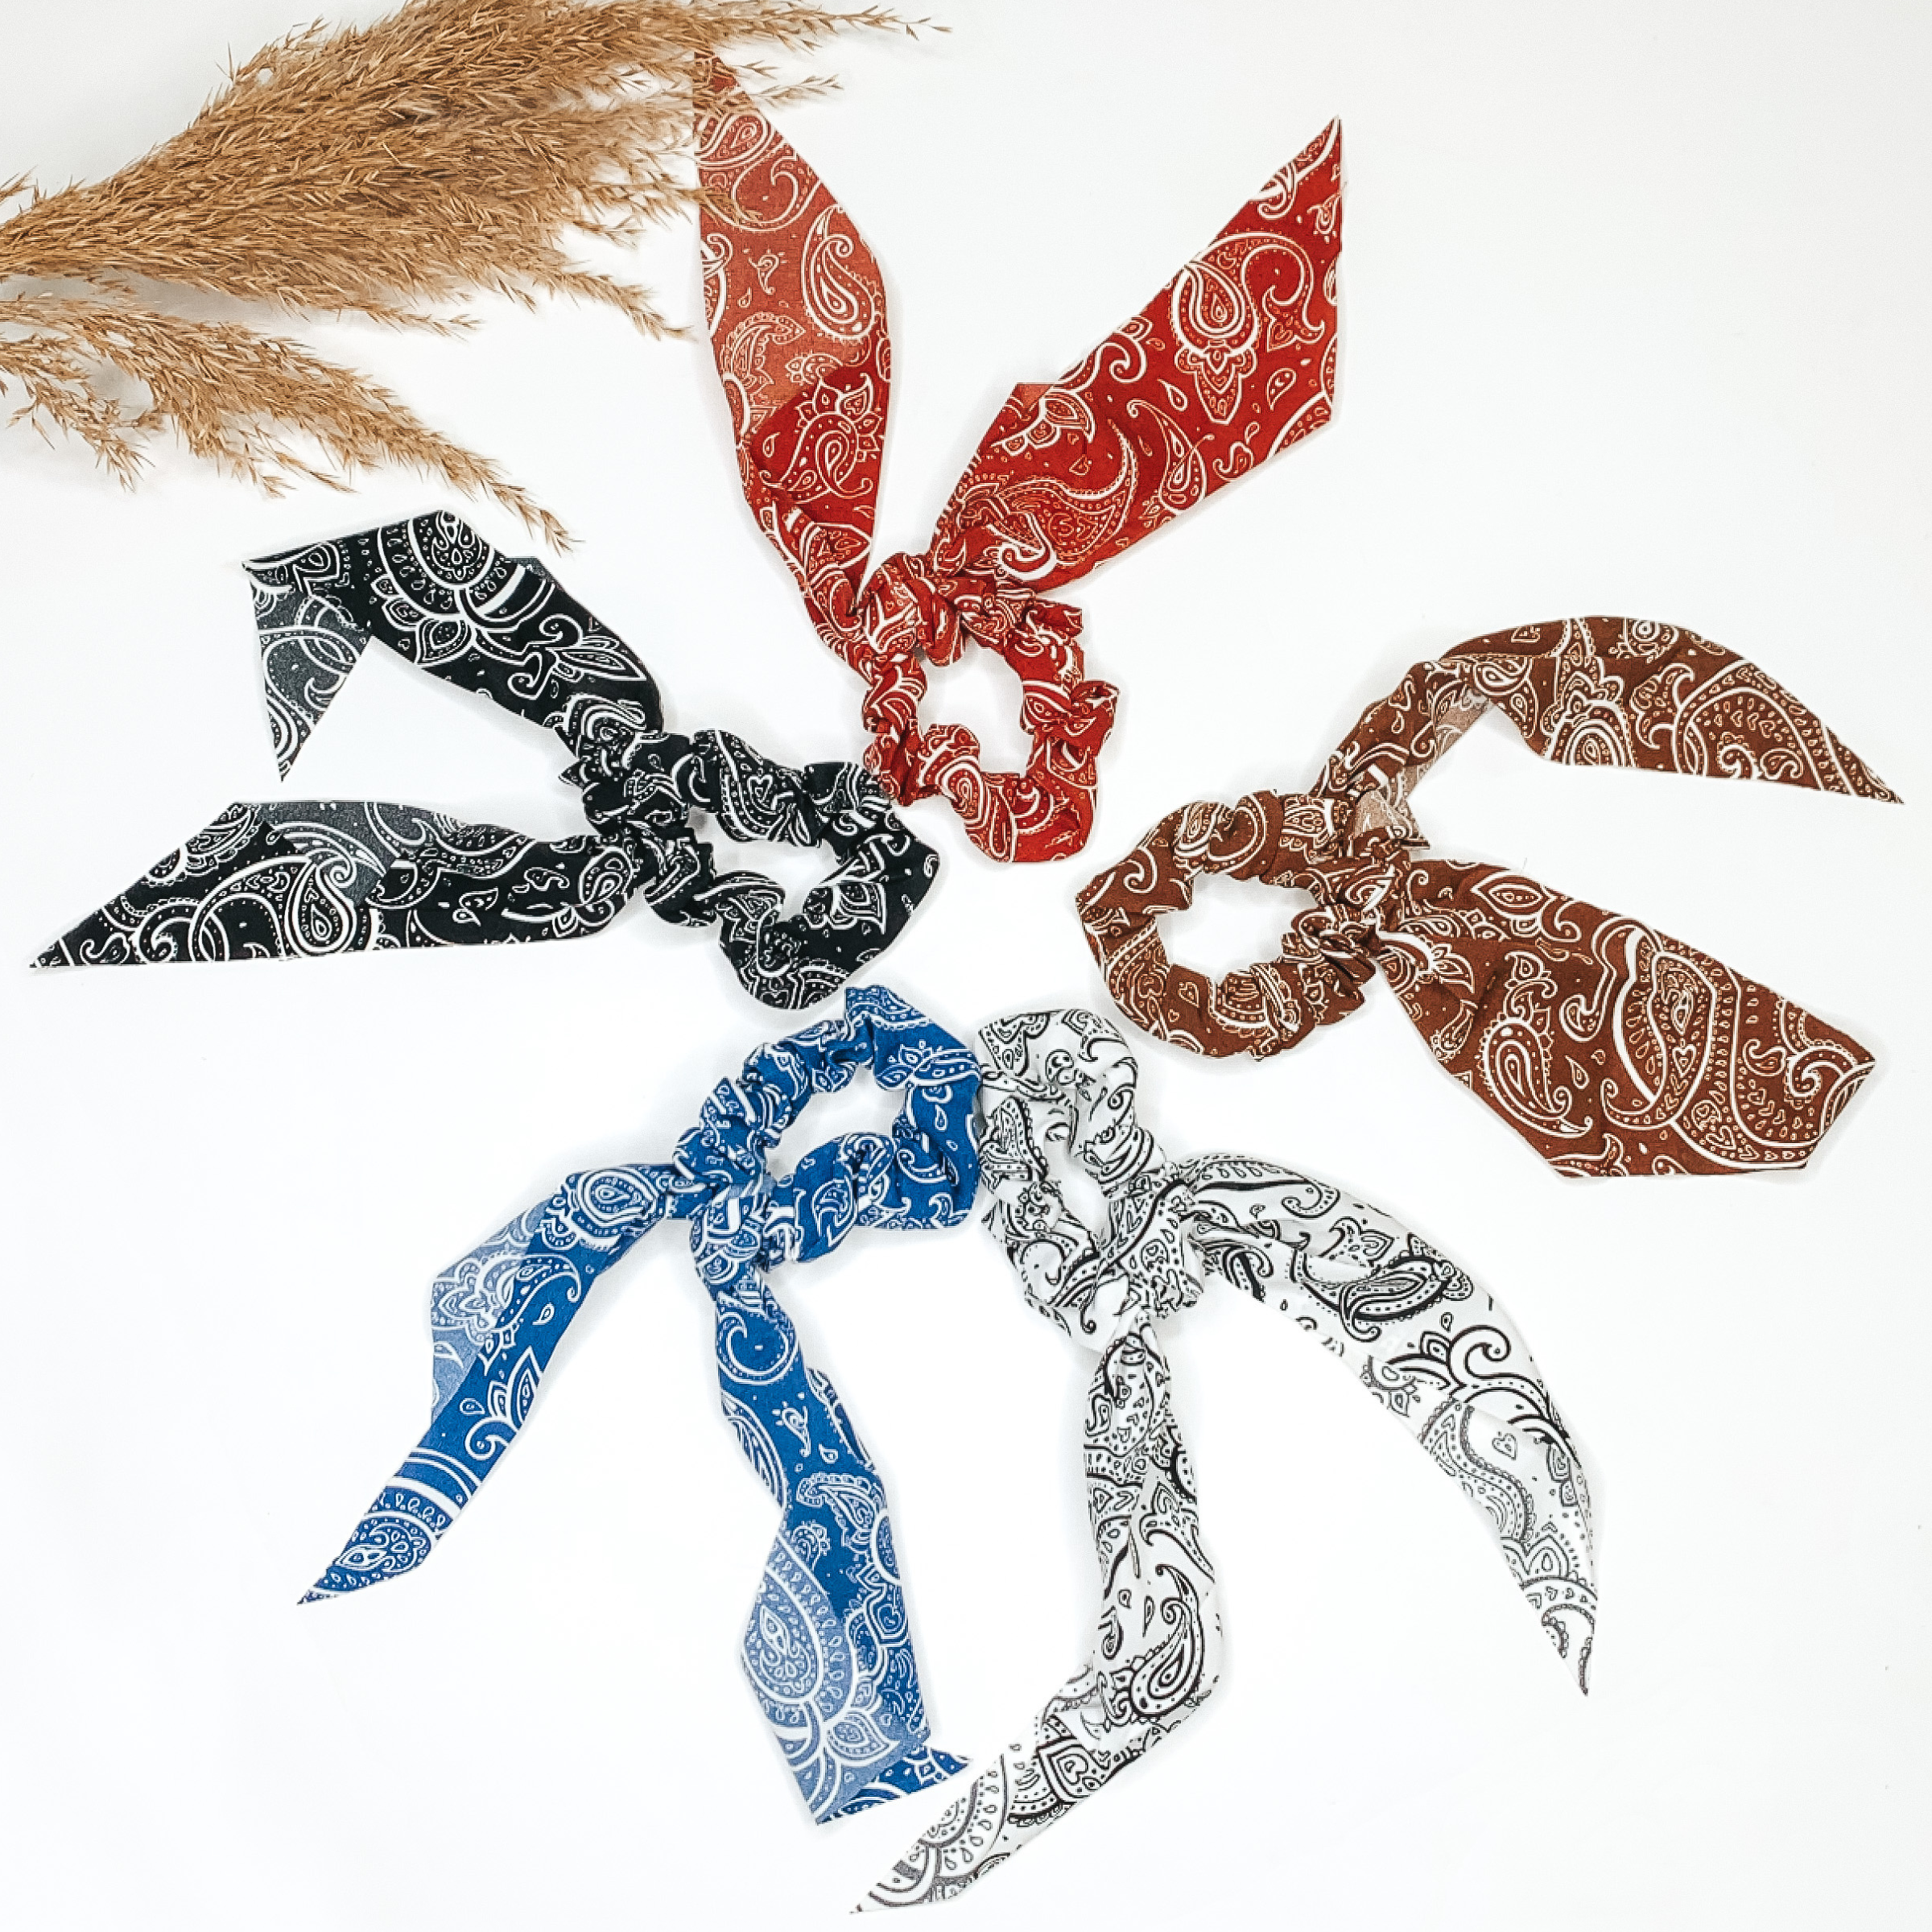 Pictured are five scrunchies with a black paisley pattern and a tie. The scrunchies come in black, blue, white, rust, and brown. These scrunchies are pictured in a circle on a white background with tan pompus grass in the top left corner.